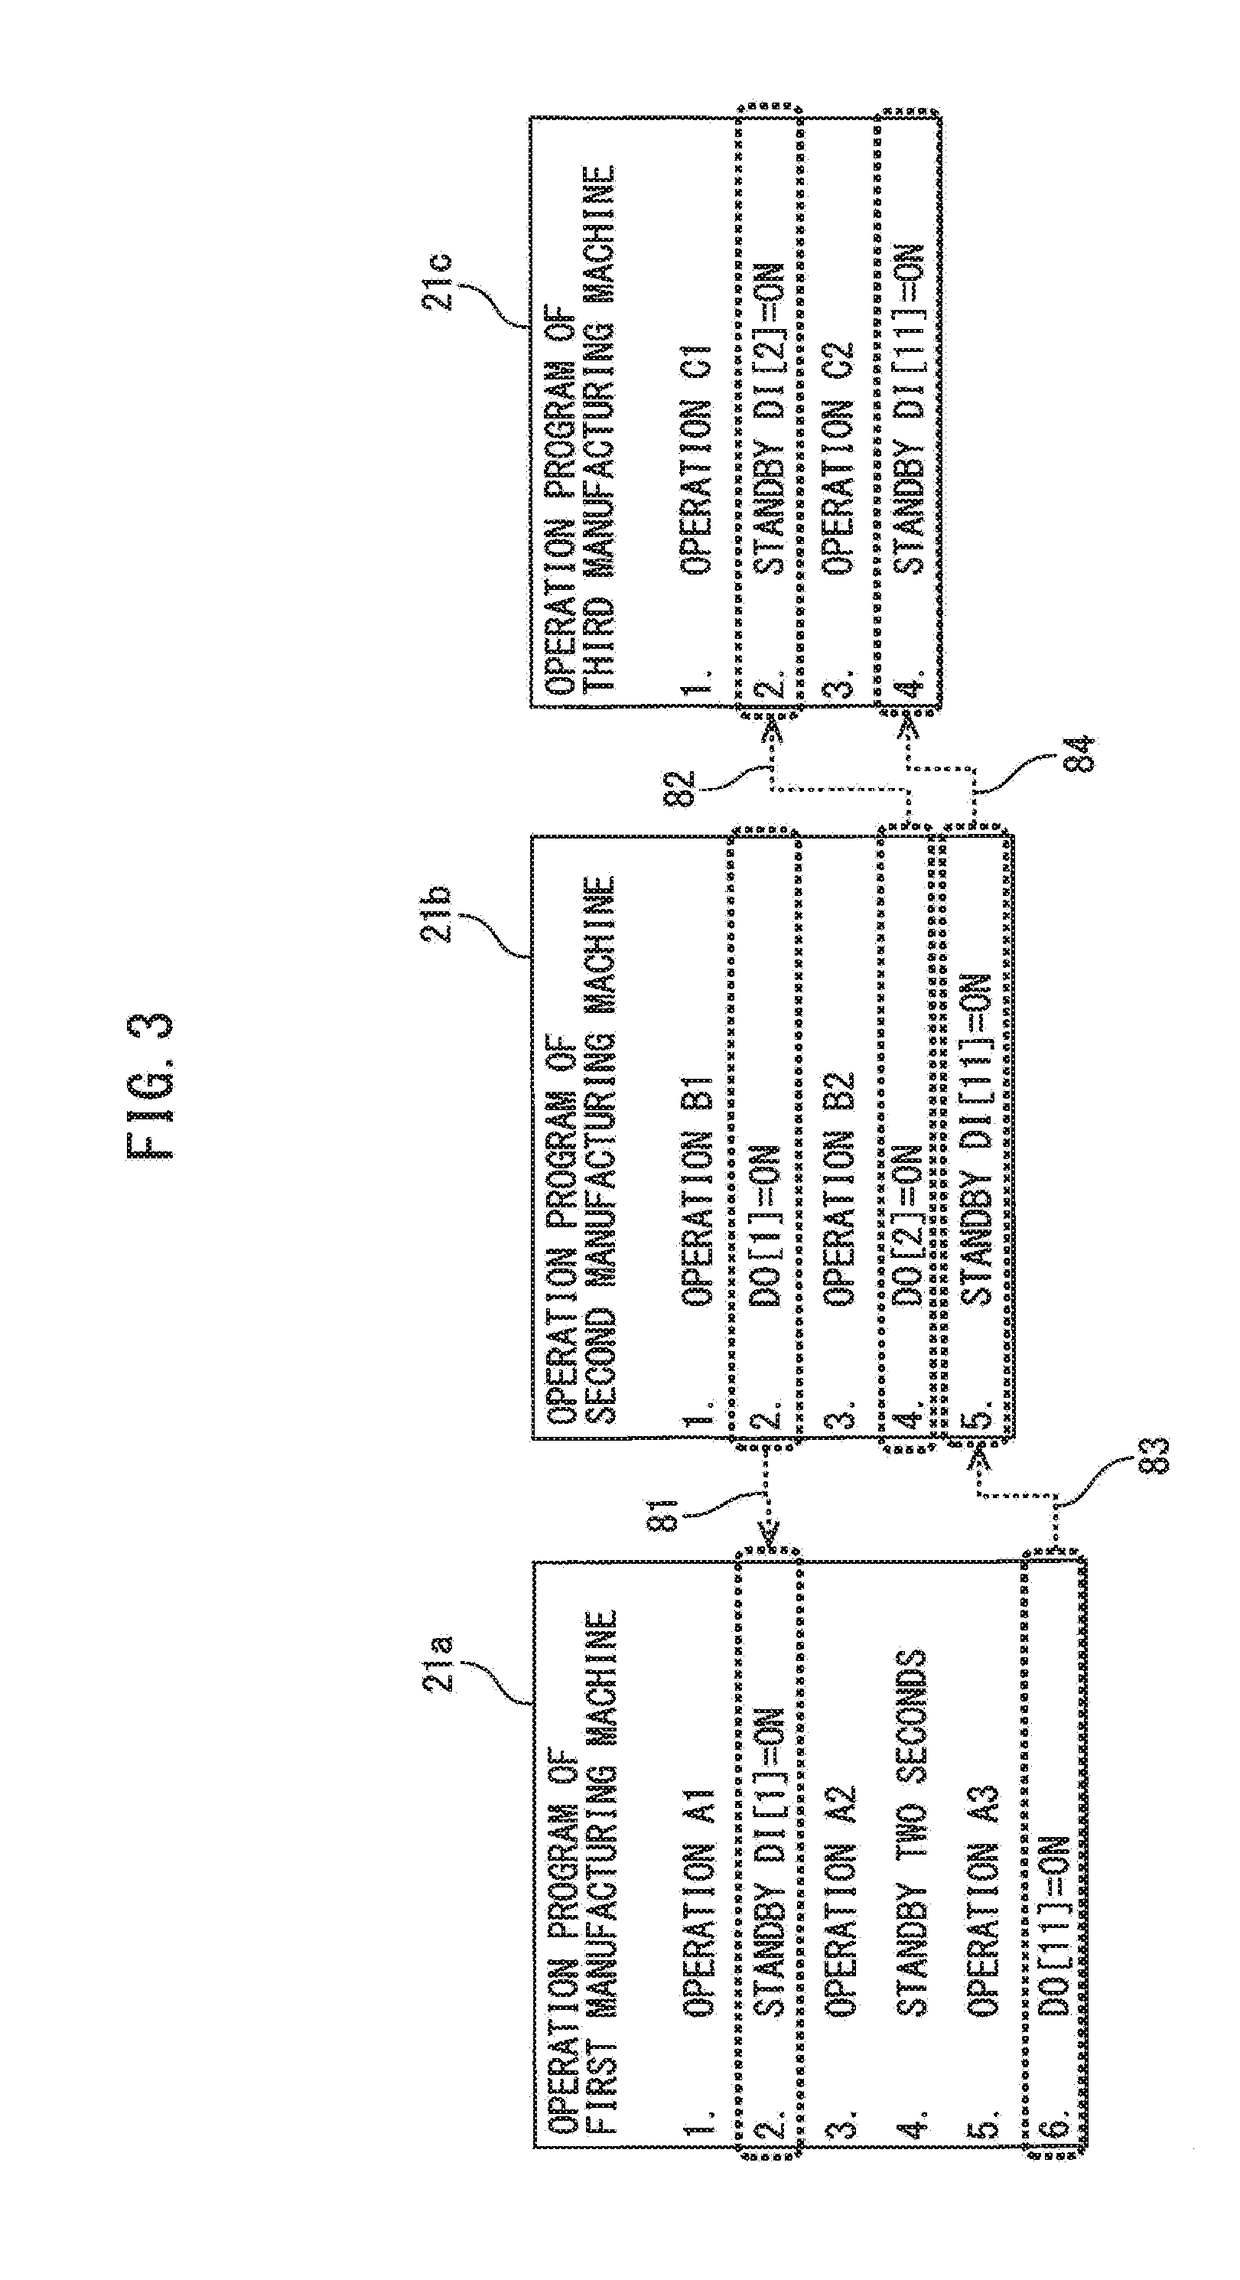 Manufacturing management apparatus which reduces operational load of manufacturing machines